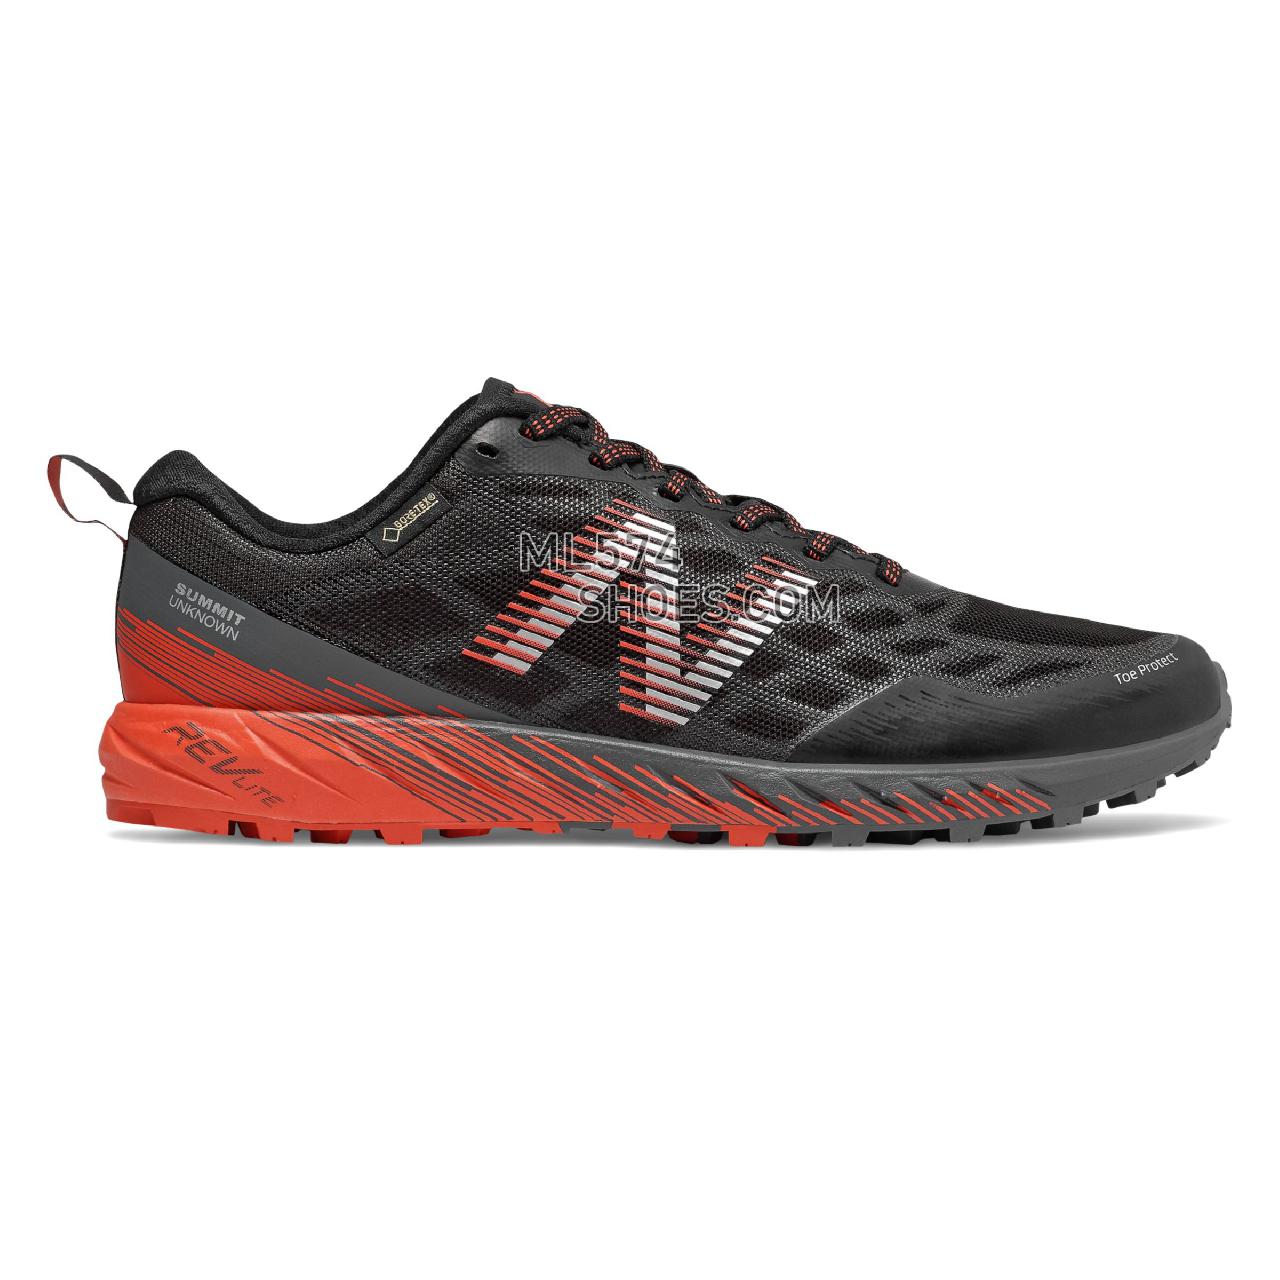 New Balance Summit Unknown GTX - Men's Trail Running - Black with Lead and Coral Glow - MTUNKNGT